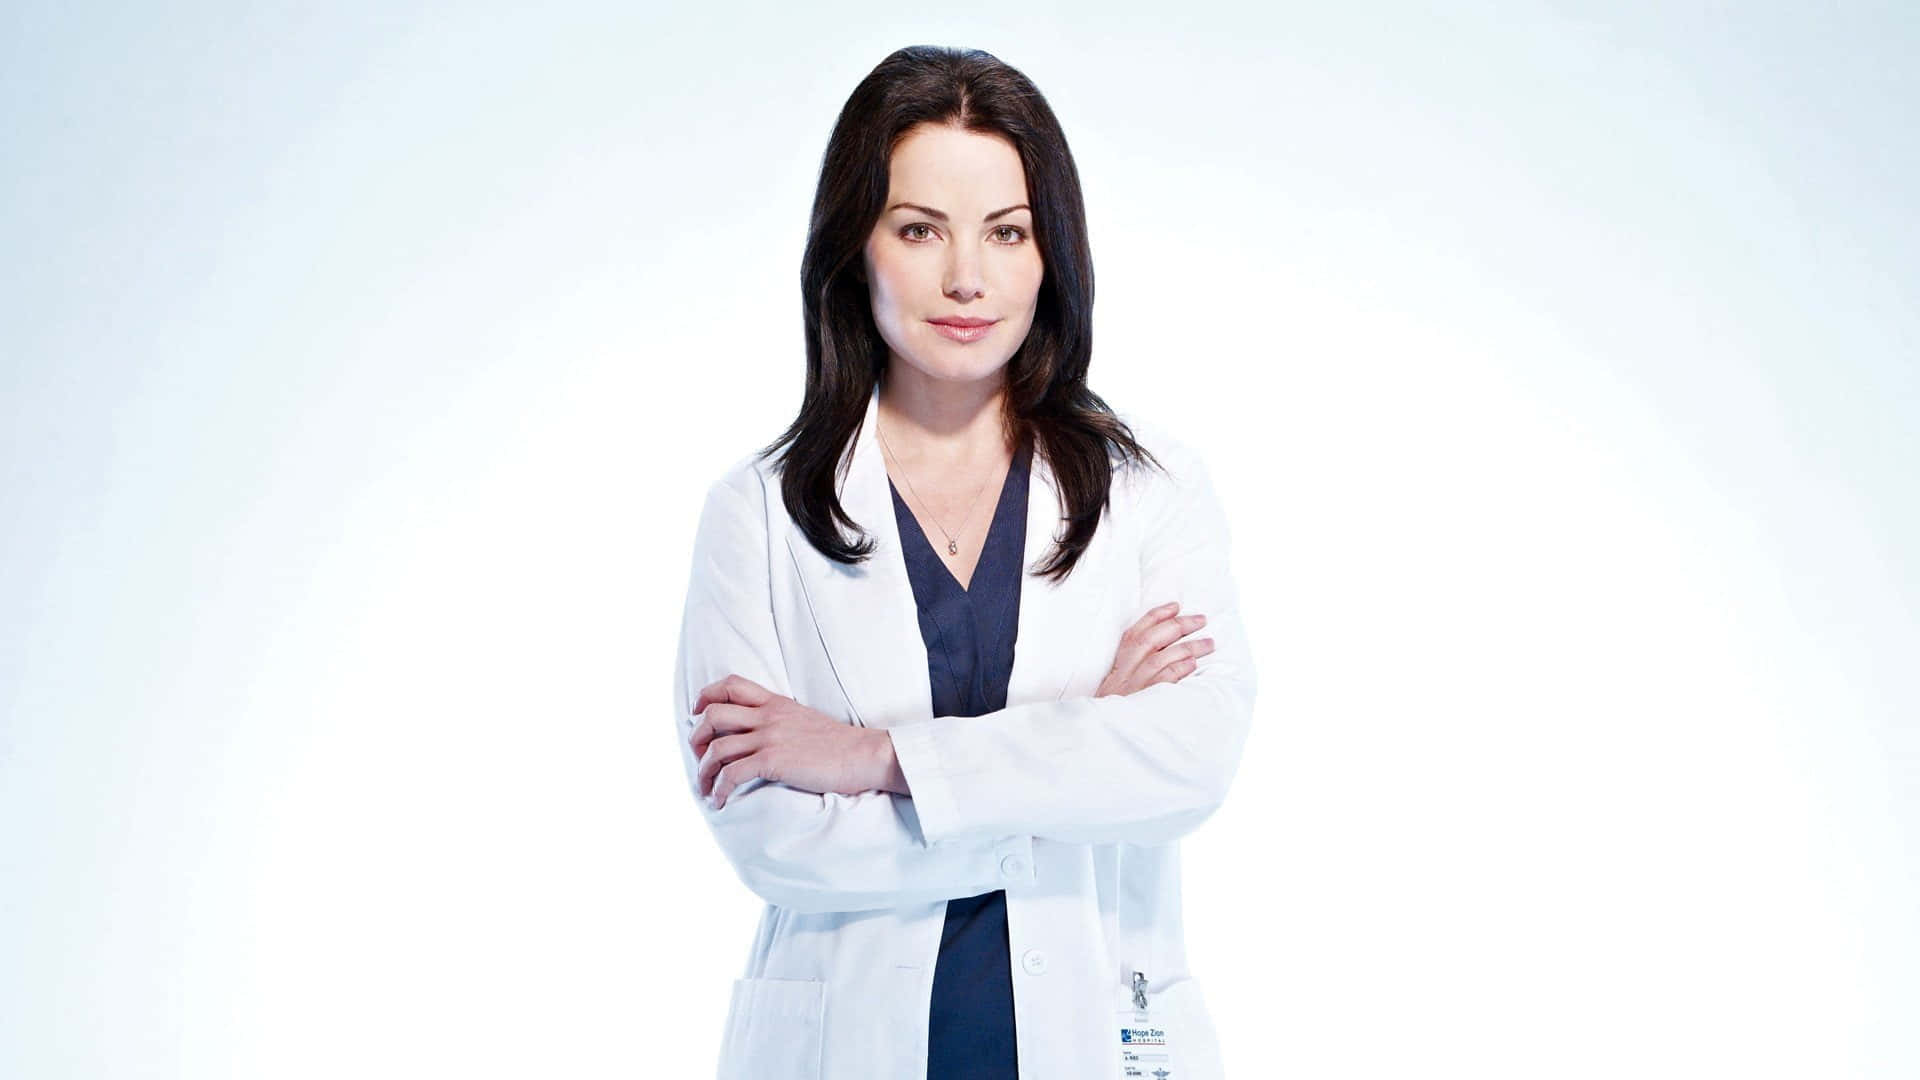 Confident Medical Professional Erica Durance Background